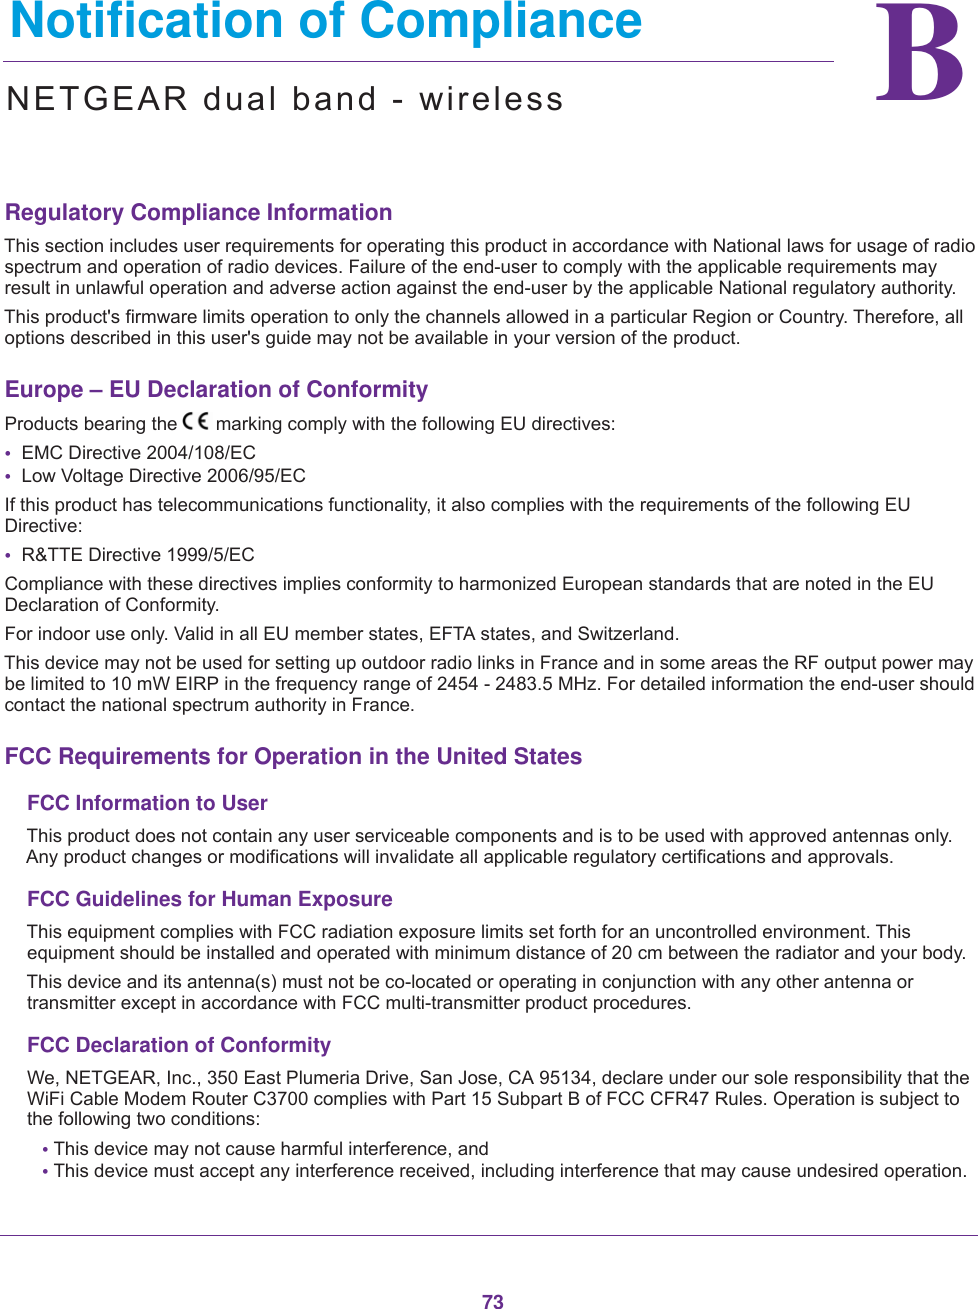 73BB.   Notification of ComplianceNETGEAR dual band - wirelessRegulatory Compliance InformationThis section includes user requirements for operating this product in accordance with National laws for usage of radio spectrum and operation of radio devices. Failure of the end-user to comply with the applicable requirements may result in unlawful operation and adverse action against the end-user by the applicable National regulatory authority.This product&apos;s firmware limits operation to only the channels allowed in a particular Region or Country. Therefore, all options described in this user&apos;s guide may not be available in your version of the product.Europe – EU Declaration of Conformity Products bearing the marking comply with the following EU directives:•  EMC Directive 2004/108/EC•  Low Voltage Directive 2006/95/ECIf this product has telecommunications functionality, it also complies with the requirements of the following EU Directive:•  R&amp;TTE Directive 1999/5/ECCompliance with these directives implies conformity to harmonized European standards that are noted in the EU Declaration of Conformity. For indoor use only. Valid in all EU member states, EFTA states, and Switzerland.This device may not be used for setting up outdoor radio links in France and in some areas the RF output power may be limited to 10 mW EIRP in the frequency range of 2454 - 2483.5 MHz. For detailed information the end-user should contact the national spectrum authority in France.FCC Requirements for Operation in the United States FCC Information to UserThis product does not contain any user serviceable components and is to be used with approved antennas only. Any product changes or modifications will invalidate all applicable regulatory certifications and approvals.FCC Guidelines for Human ExposureThis equipment complies with FCC radiation exposure limits set forth for an uncontrolled environment. This equipment should be installed and operated with minimum distance of 20 cm between the radiator and your body.This device and its antenna(s) must not be co-located or operating in conjunction with any other antenna or transmitter except in accordance with FCC multi-transmitter product procedures.FCC Declaration of ConformityWe, NETGEAR, Inc., 350 East Plumeria Drive, San Jose, CA 95134, declare under our sole responsibility that the WiFi Cable Modem Router C3700 complies with Part 15 Subpart B of FCC CFR47 Rules. Operation is subject to the following two conditions:• This device may not cause harmful interference, and• This device must accept any interference received, including interference that may cause undesired operation.